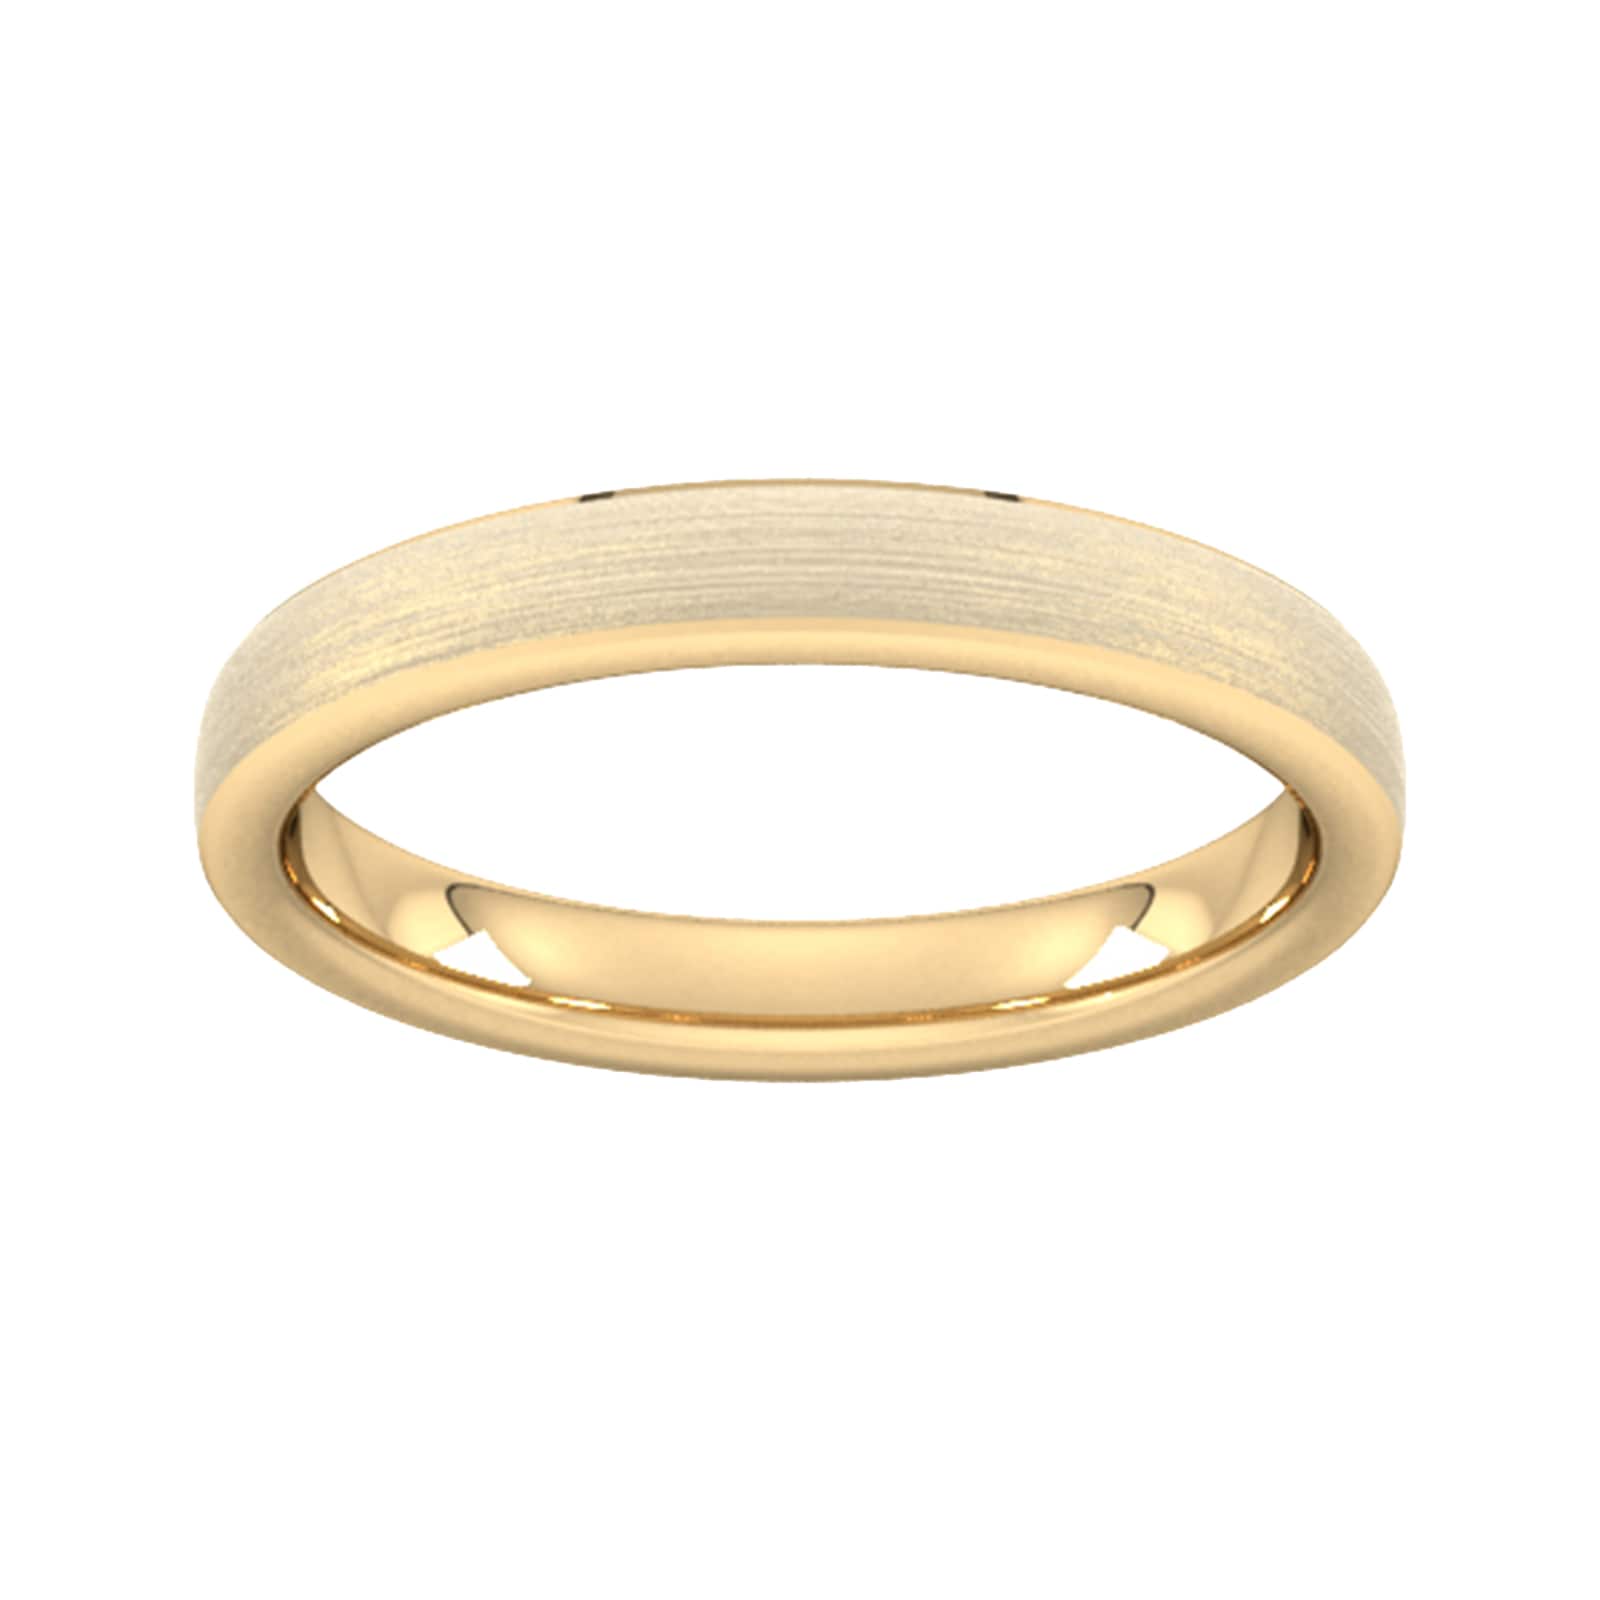 3mm D Shape Standard Polished Chamfered Edges With Matt Centre Wedding Ring In 9 Carat Yellow Gold - Ring Size T